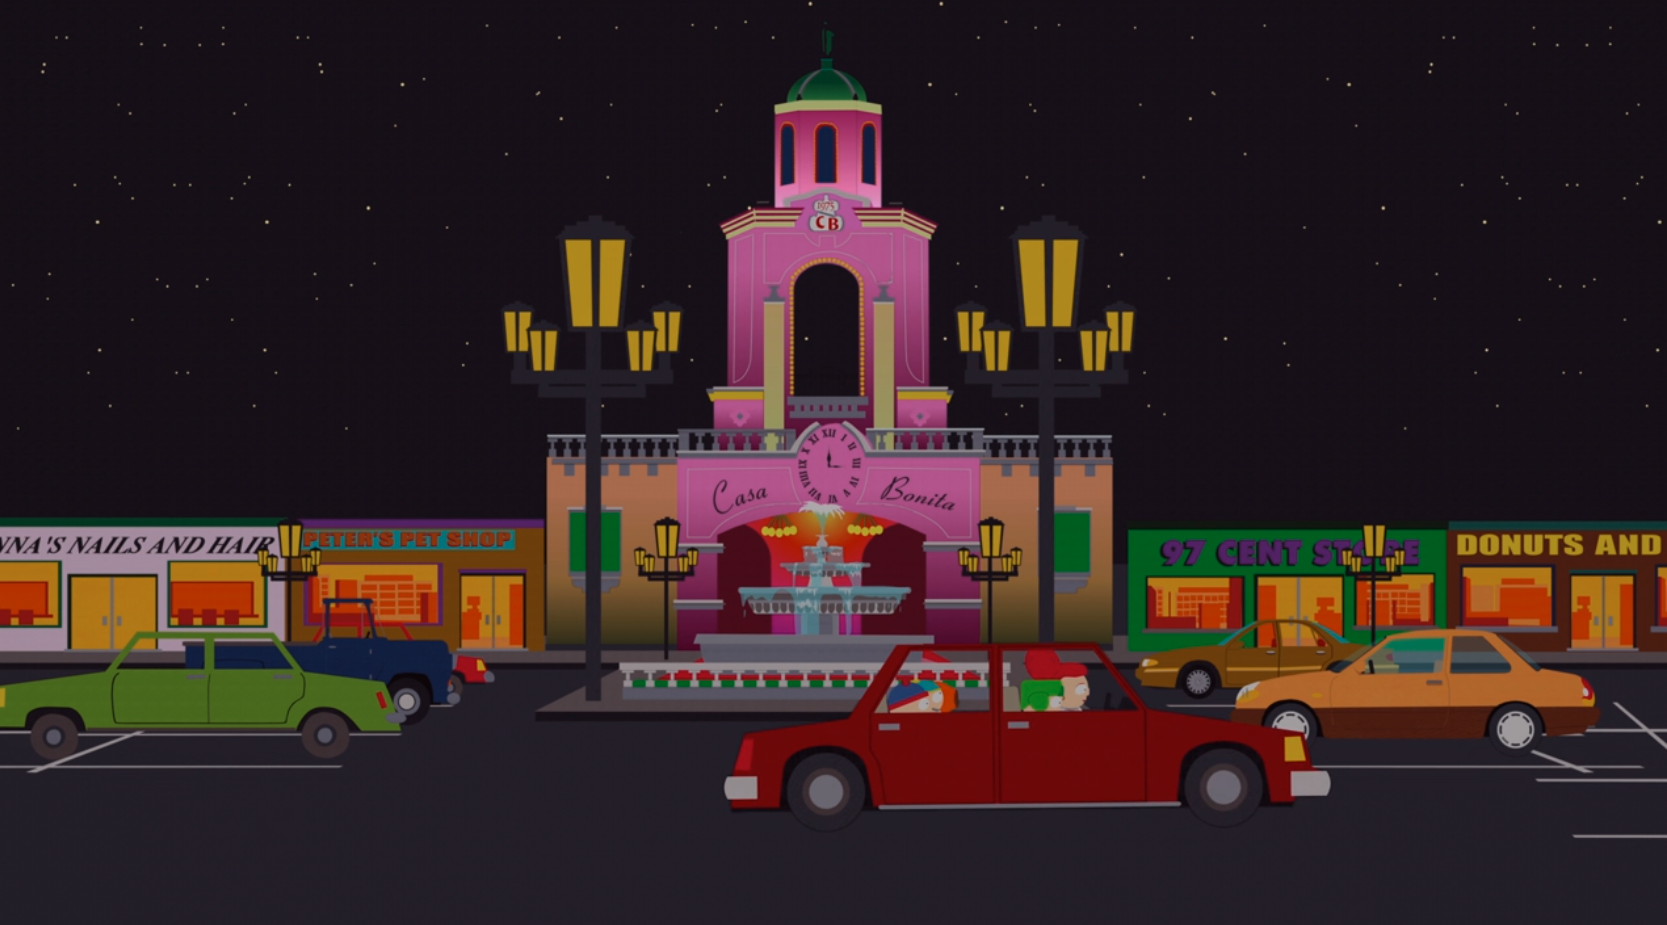 UPDATE: The South Park guys just spent some of their big pile of money to buy Casa Bonita